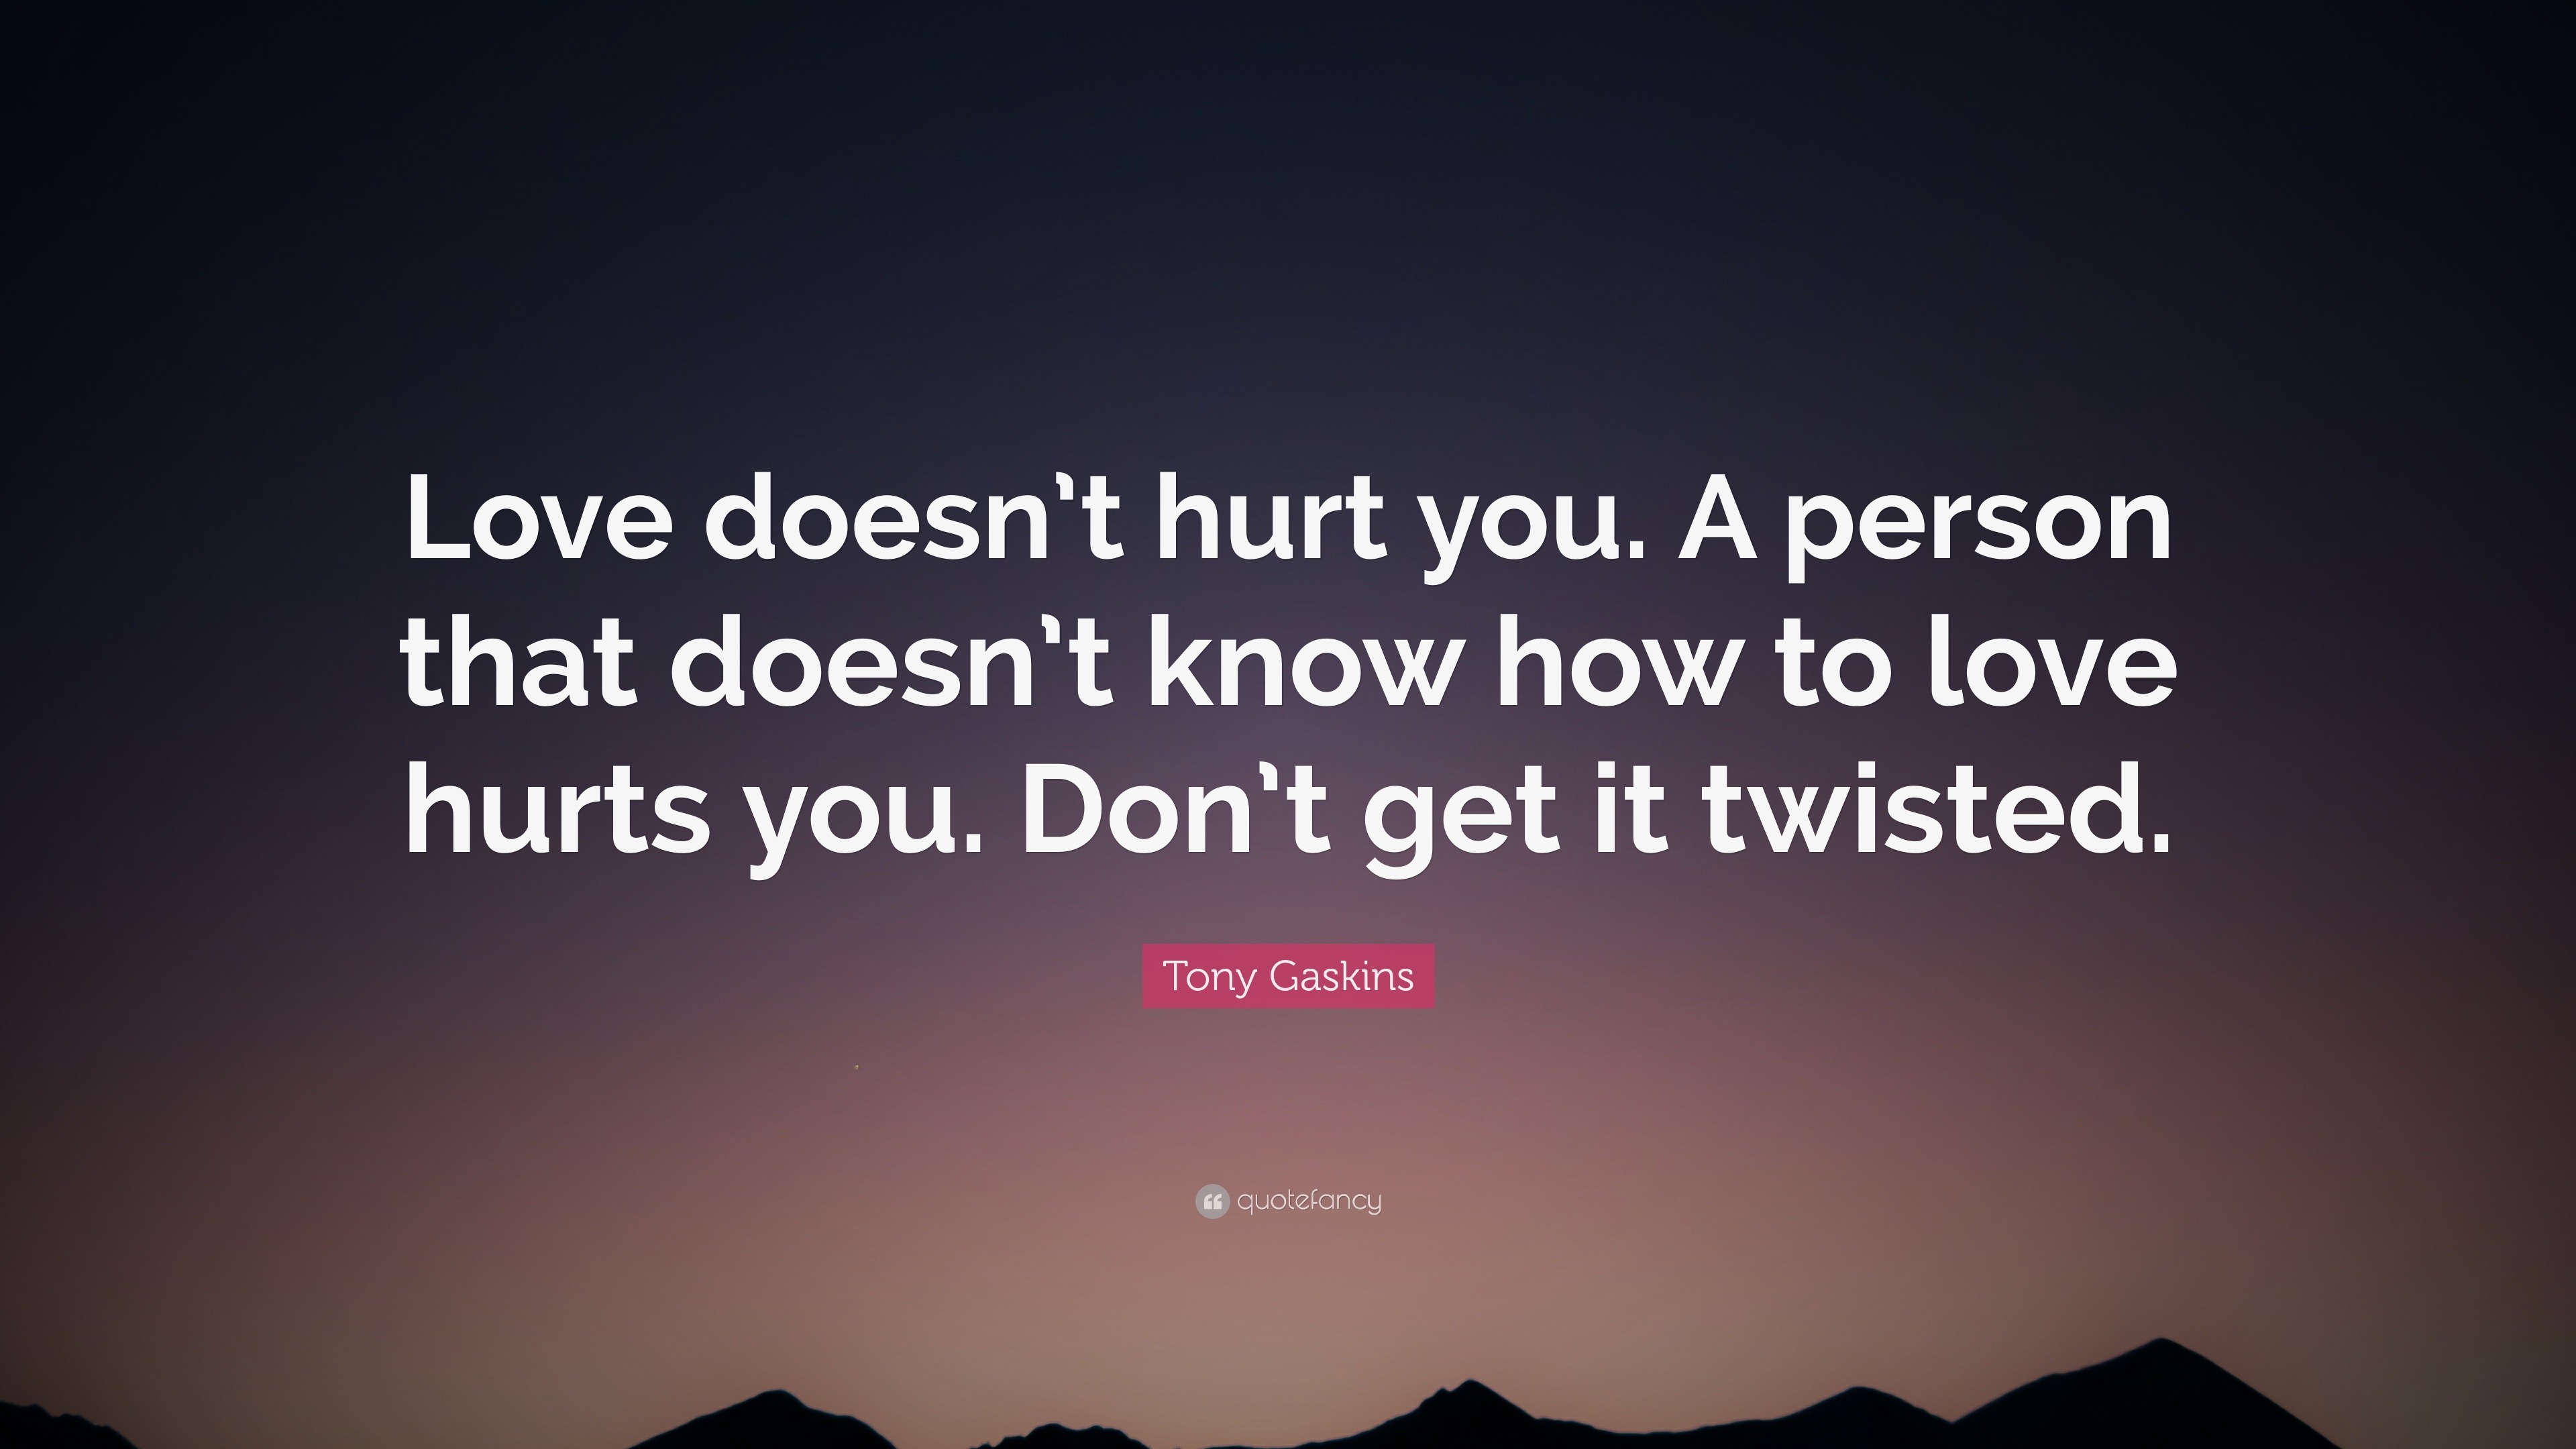 Tony Gaskins Quote: “Love doesn't hurt you. A person that doesn't know how  to